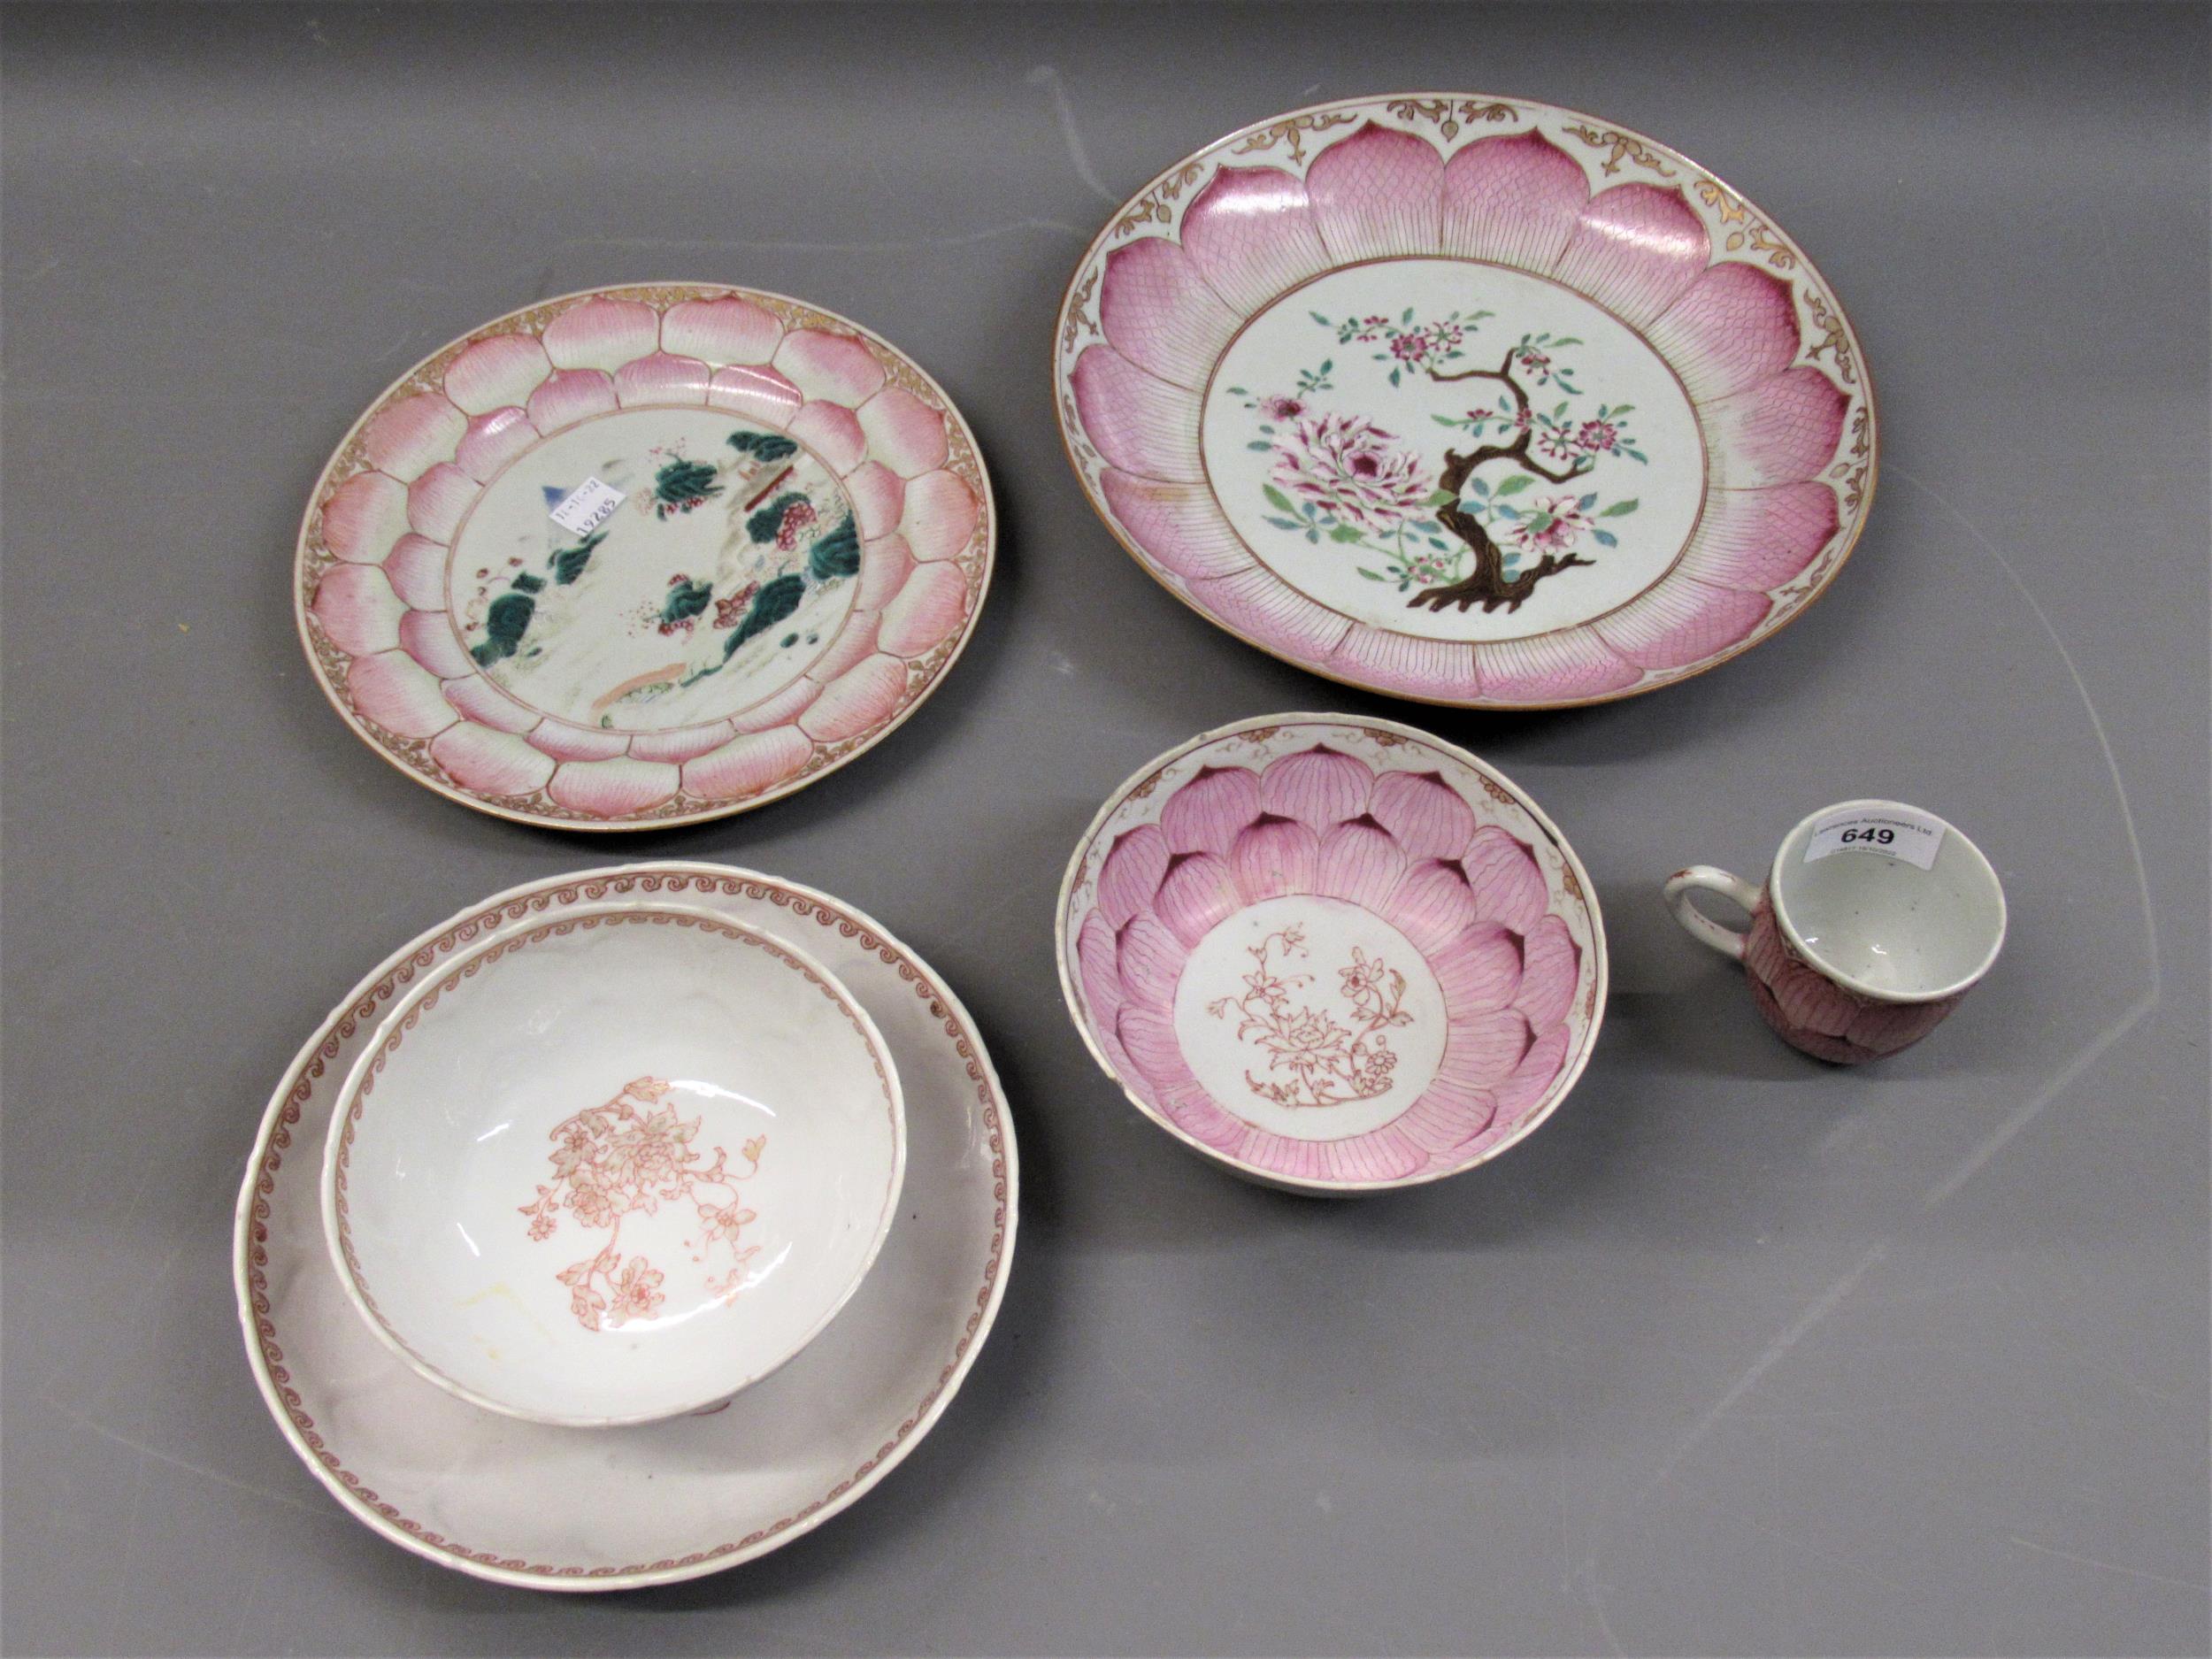 18th Century Chinese famille rose saucer dish painted with a central flowering shrub within a pink